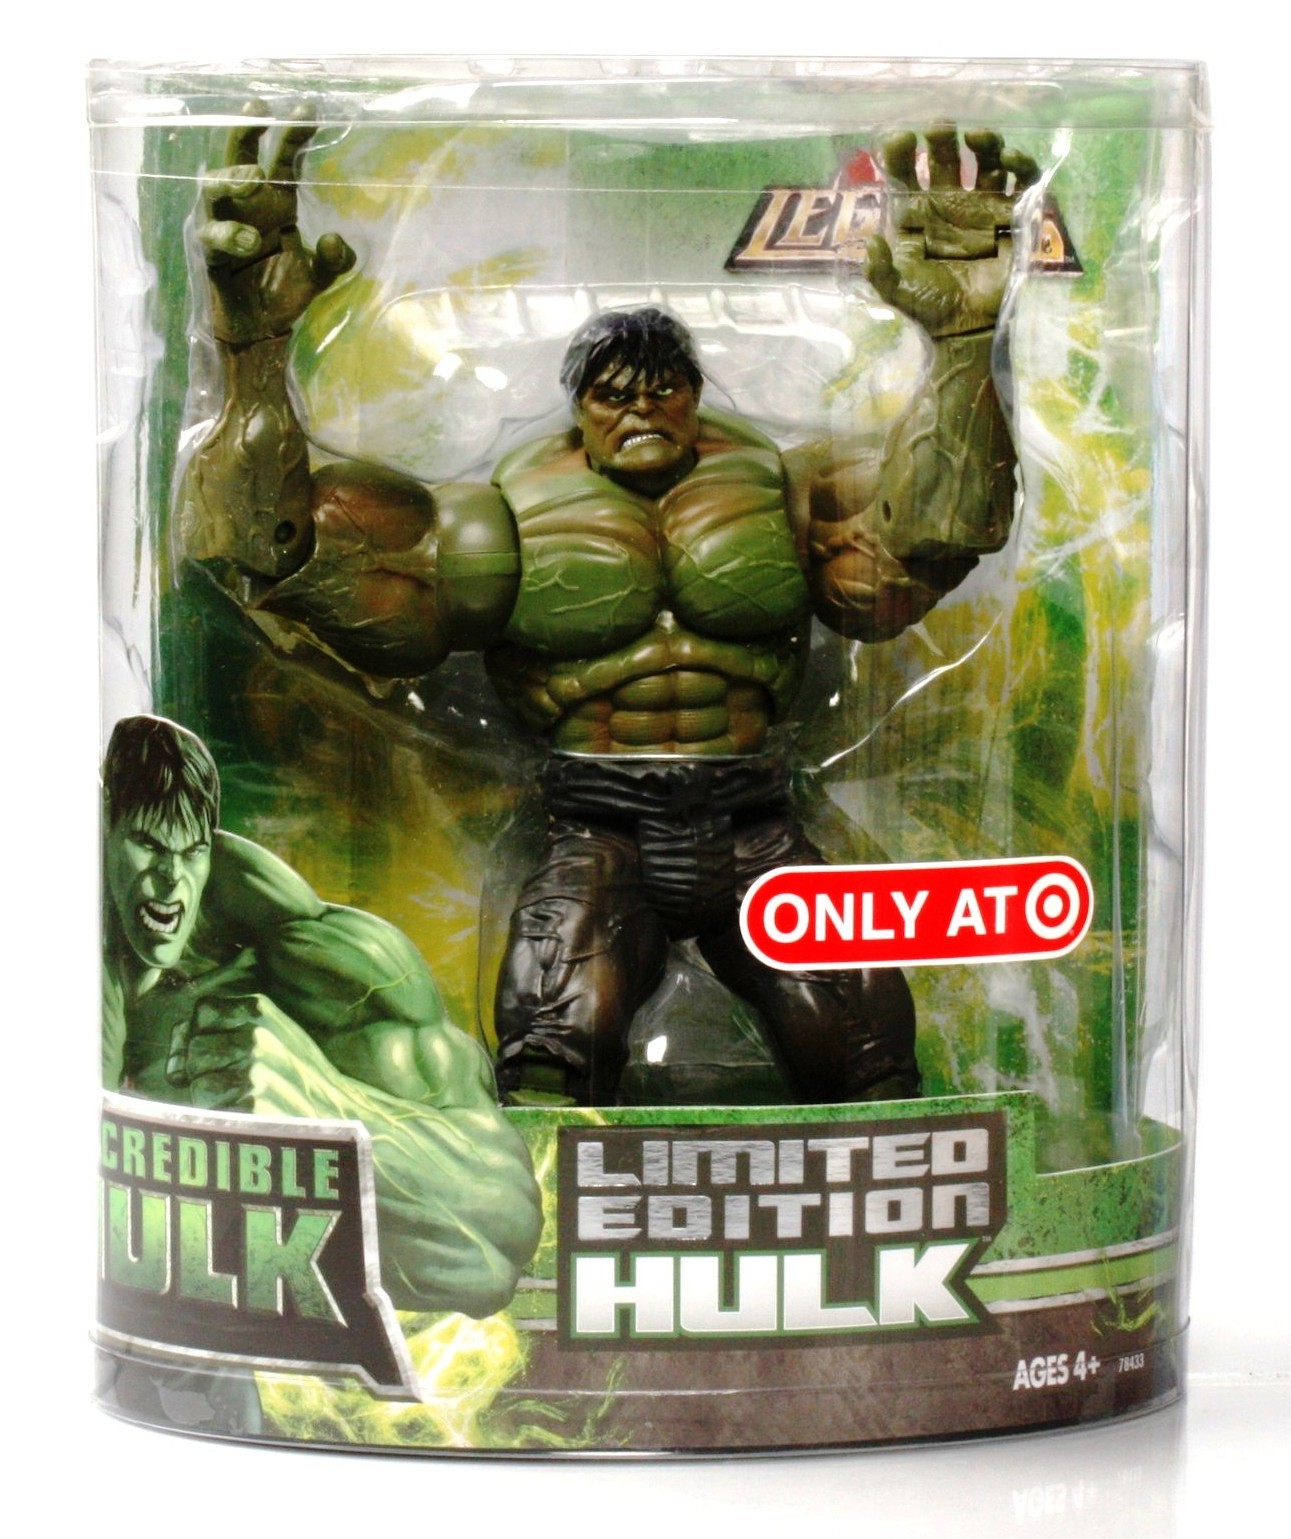 MARVEL THE INCREDIBLE HULK FIGURINES SET FIGURES COLLECTIBLES MINIATURES 